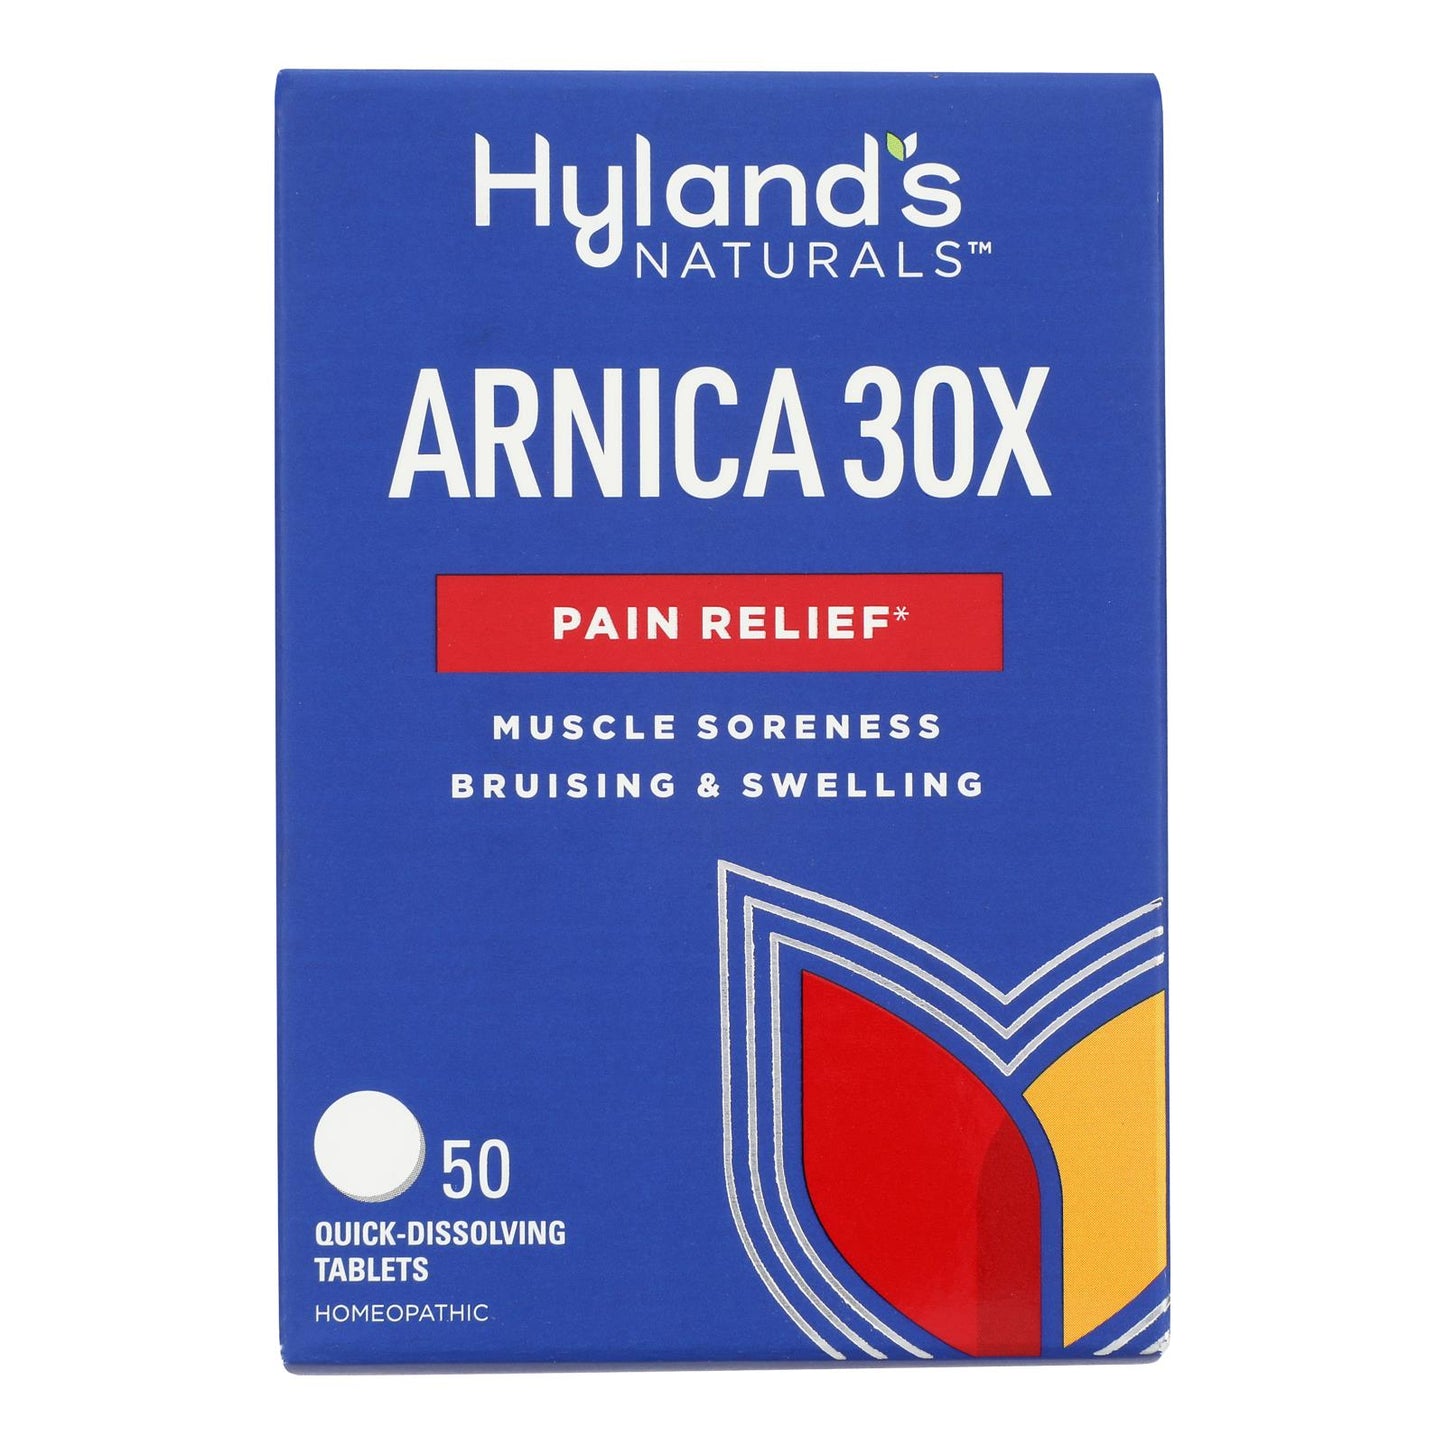 Hyland's - Arnica 30x - Case Of 3-50 Tablets